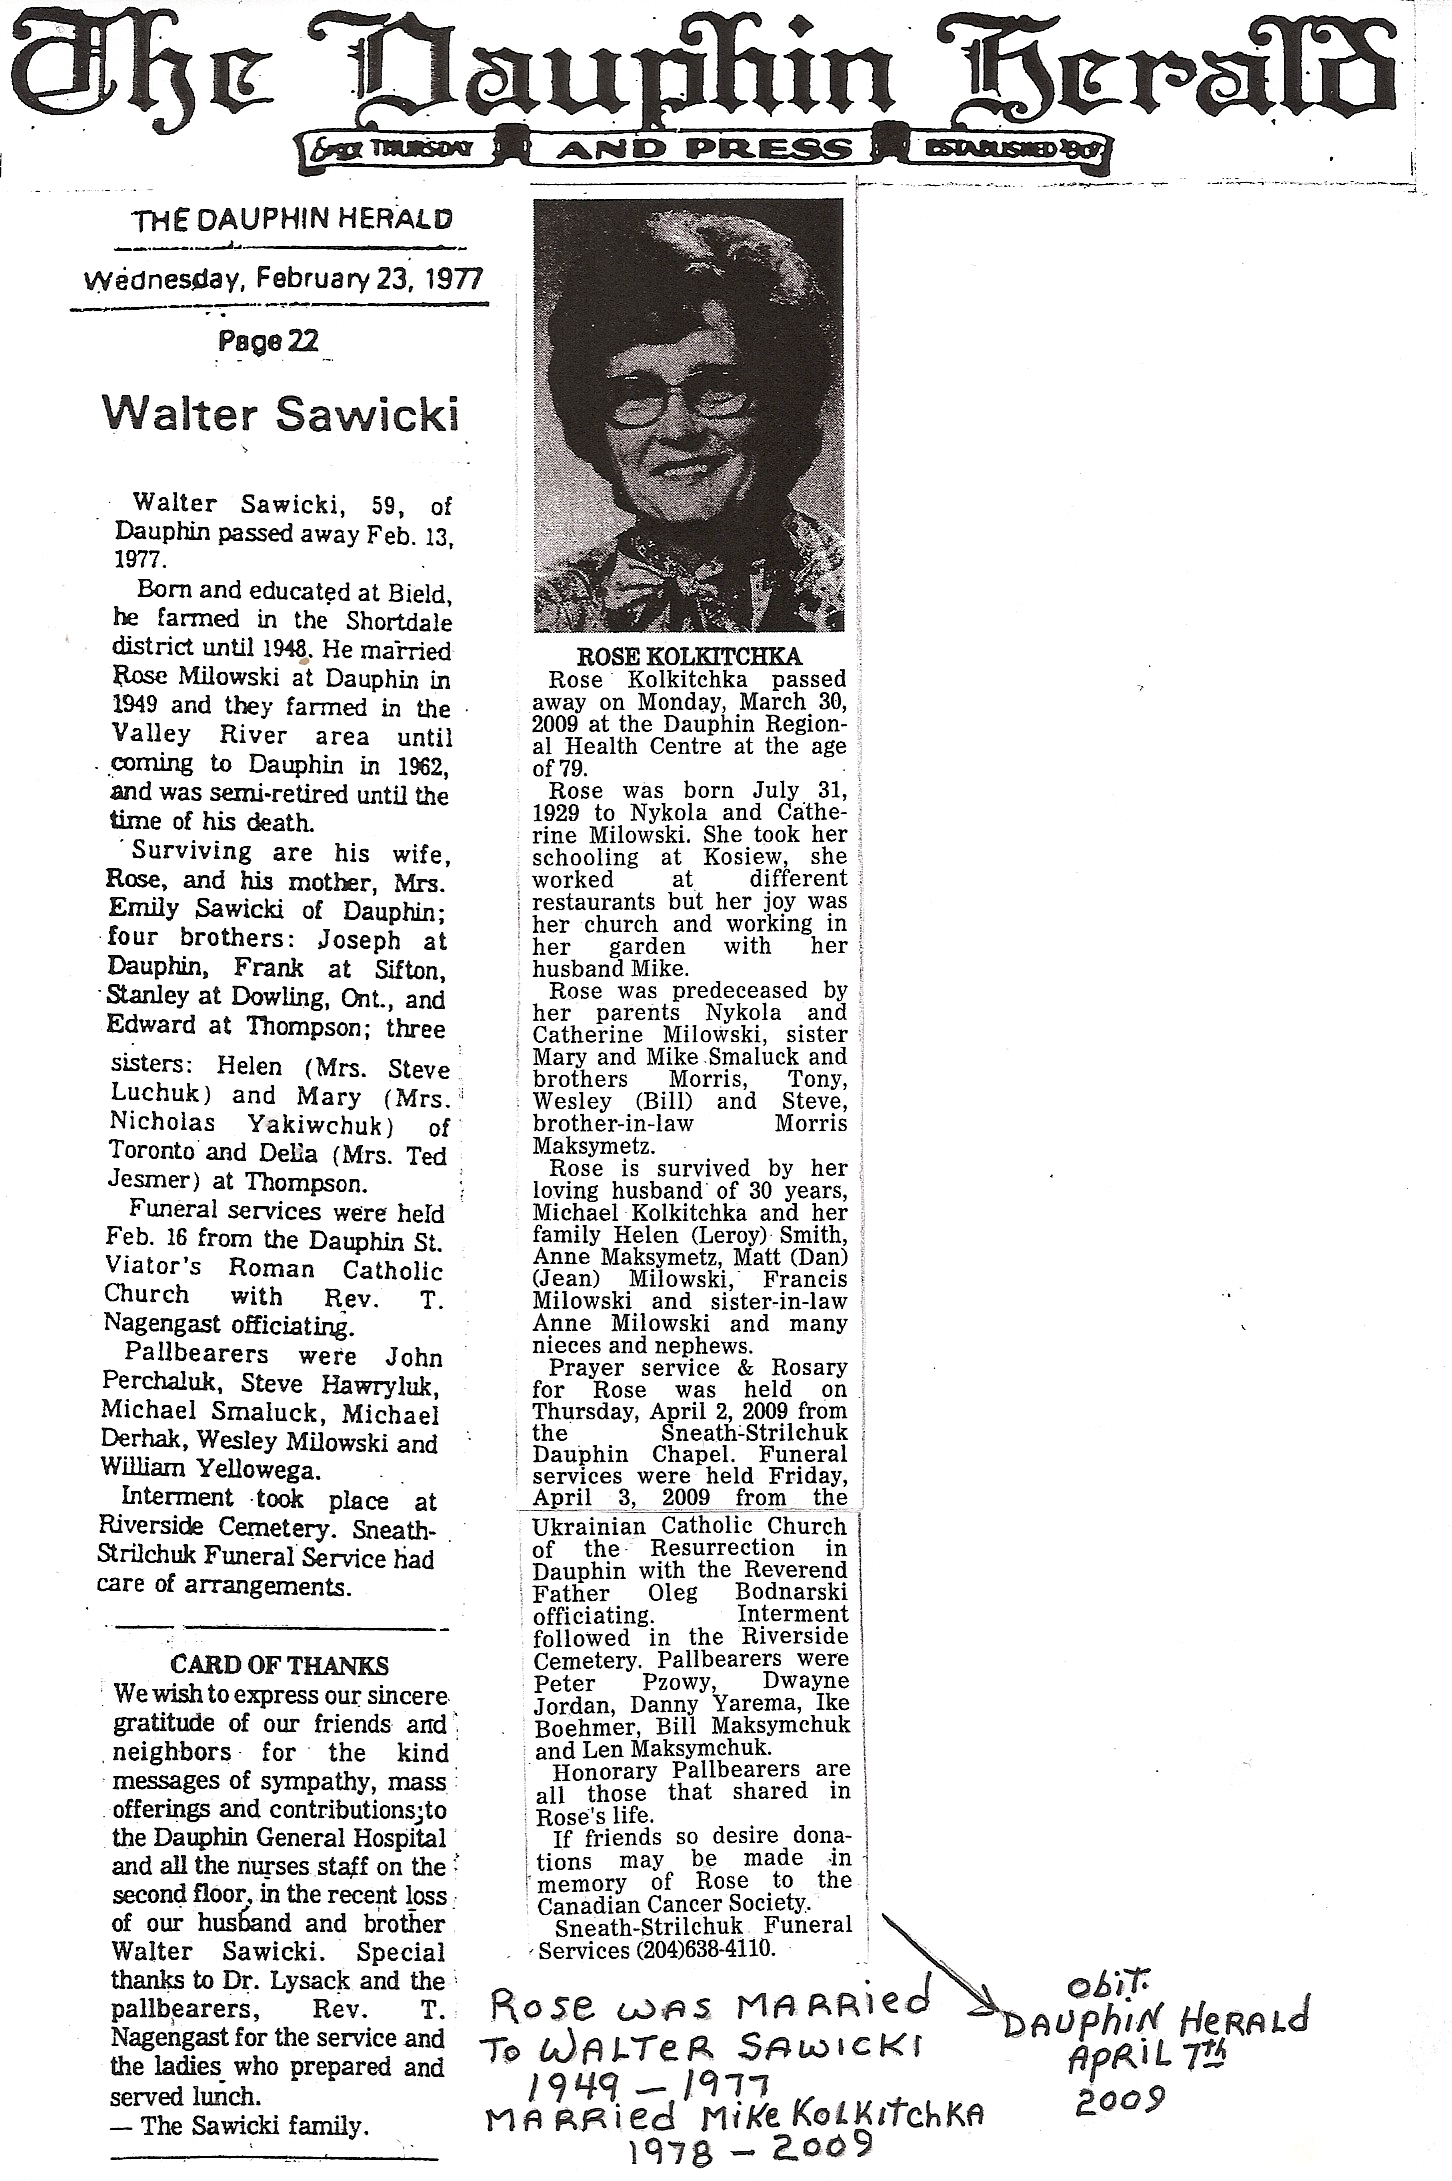 1-walter and rose obit-full page